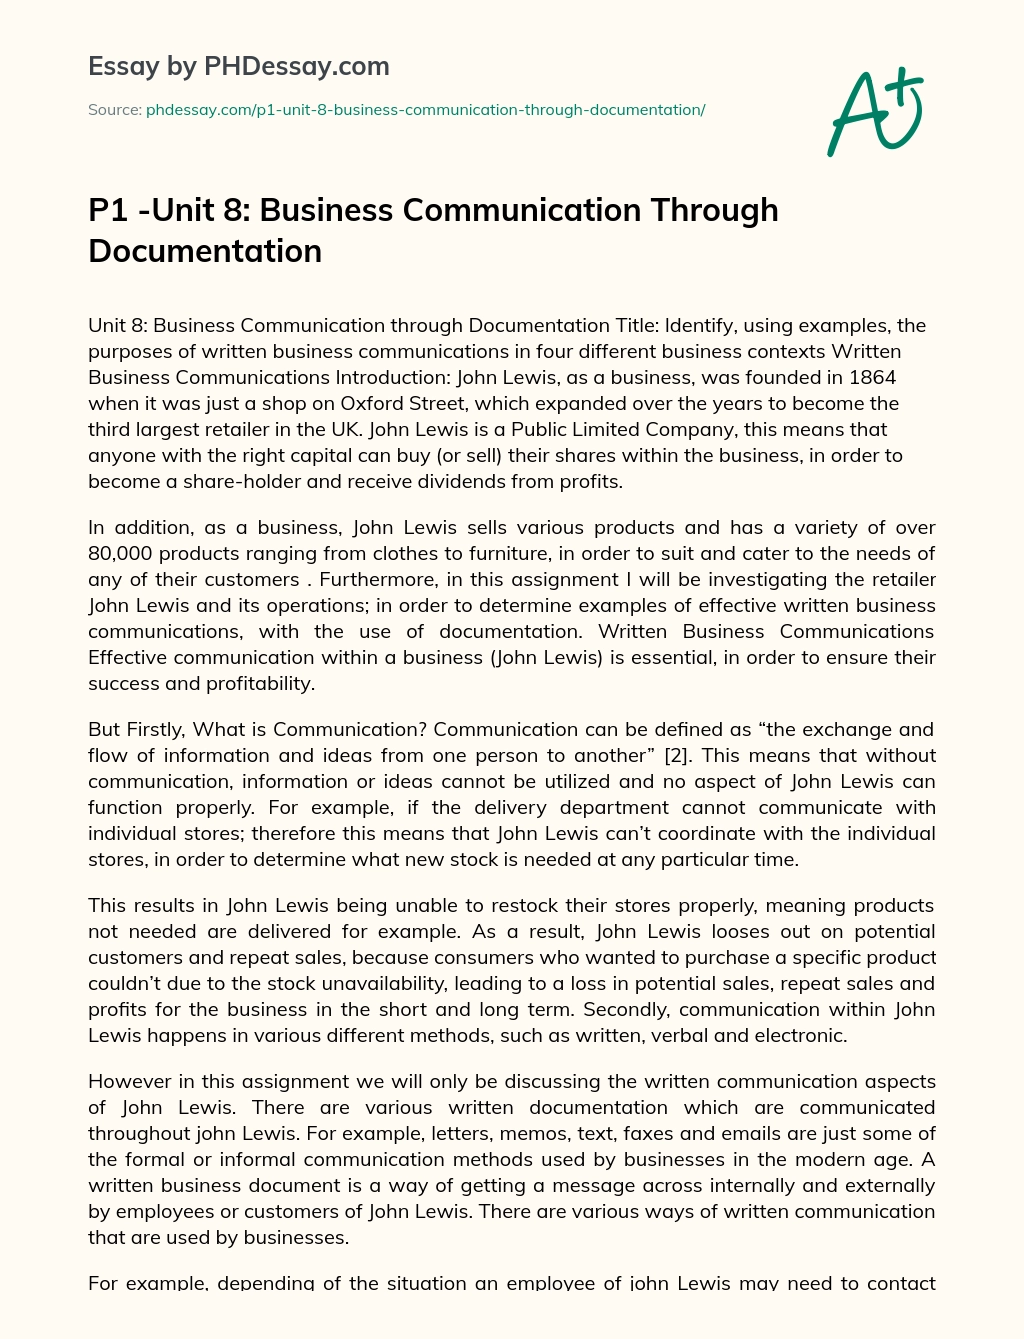 Реферат: The Need For Communication In Business Essay